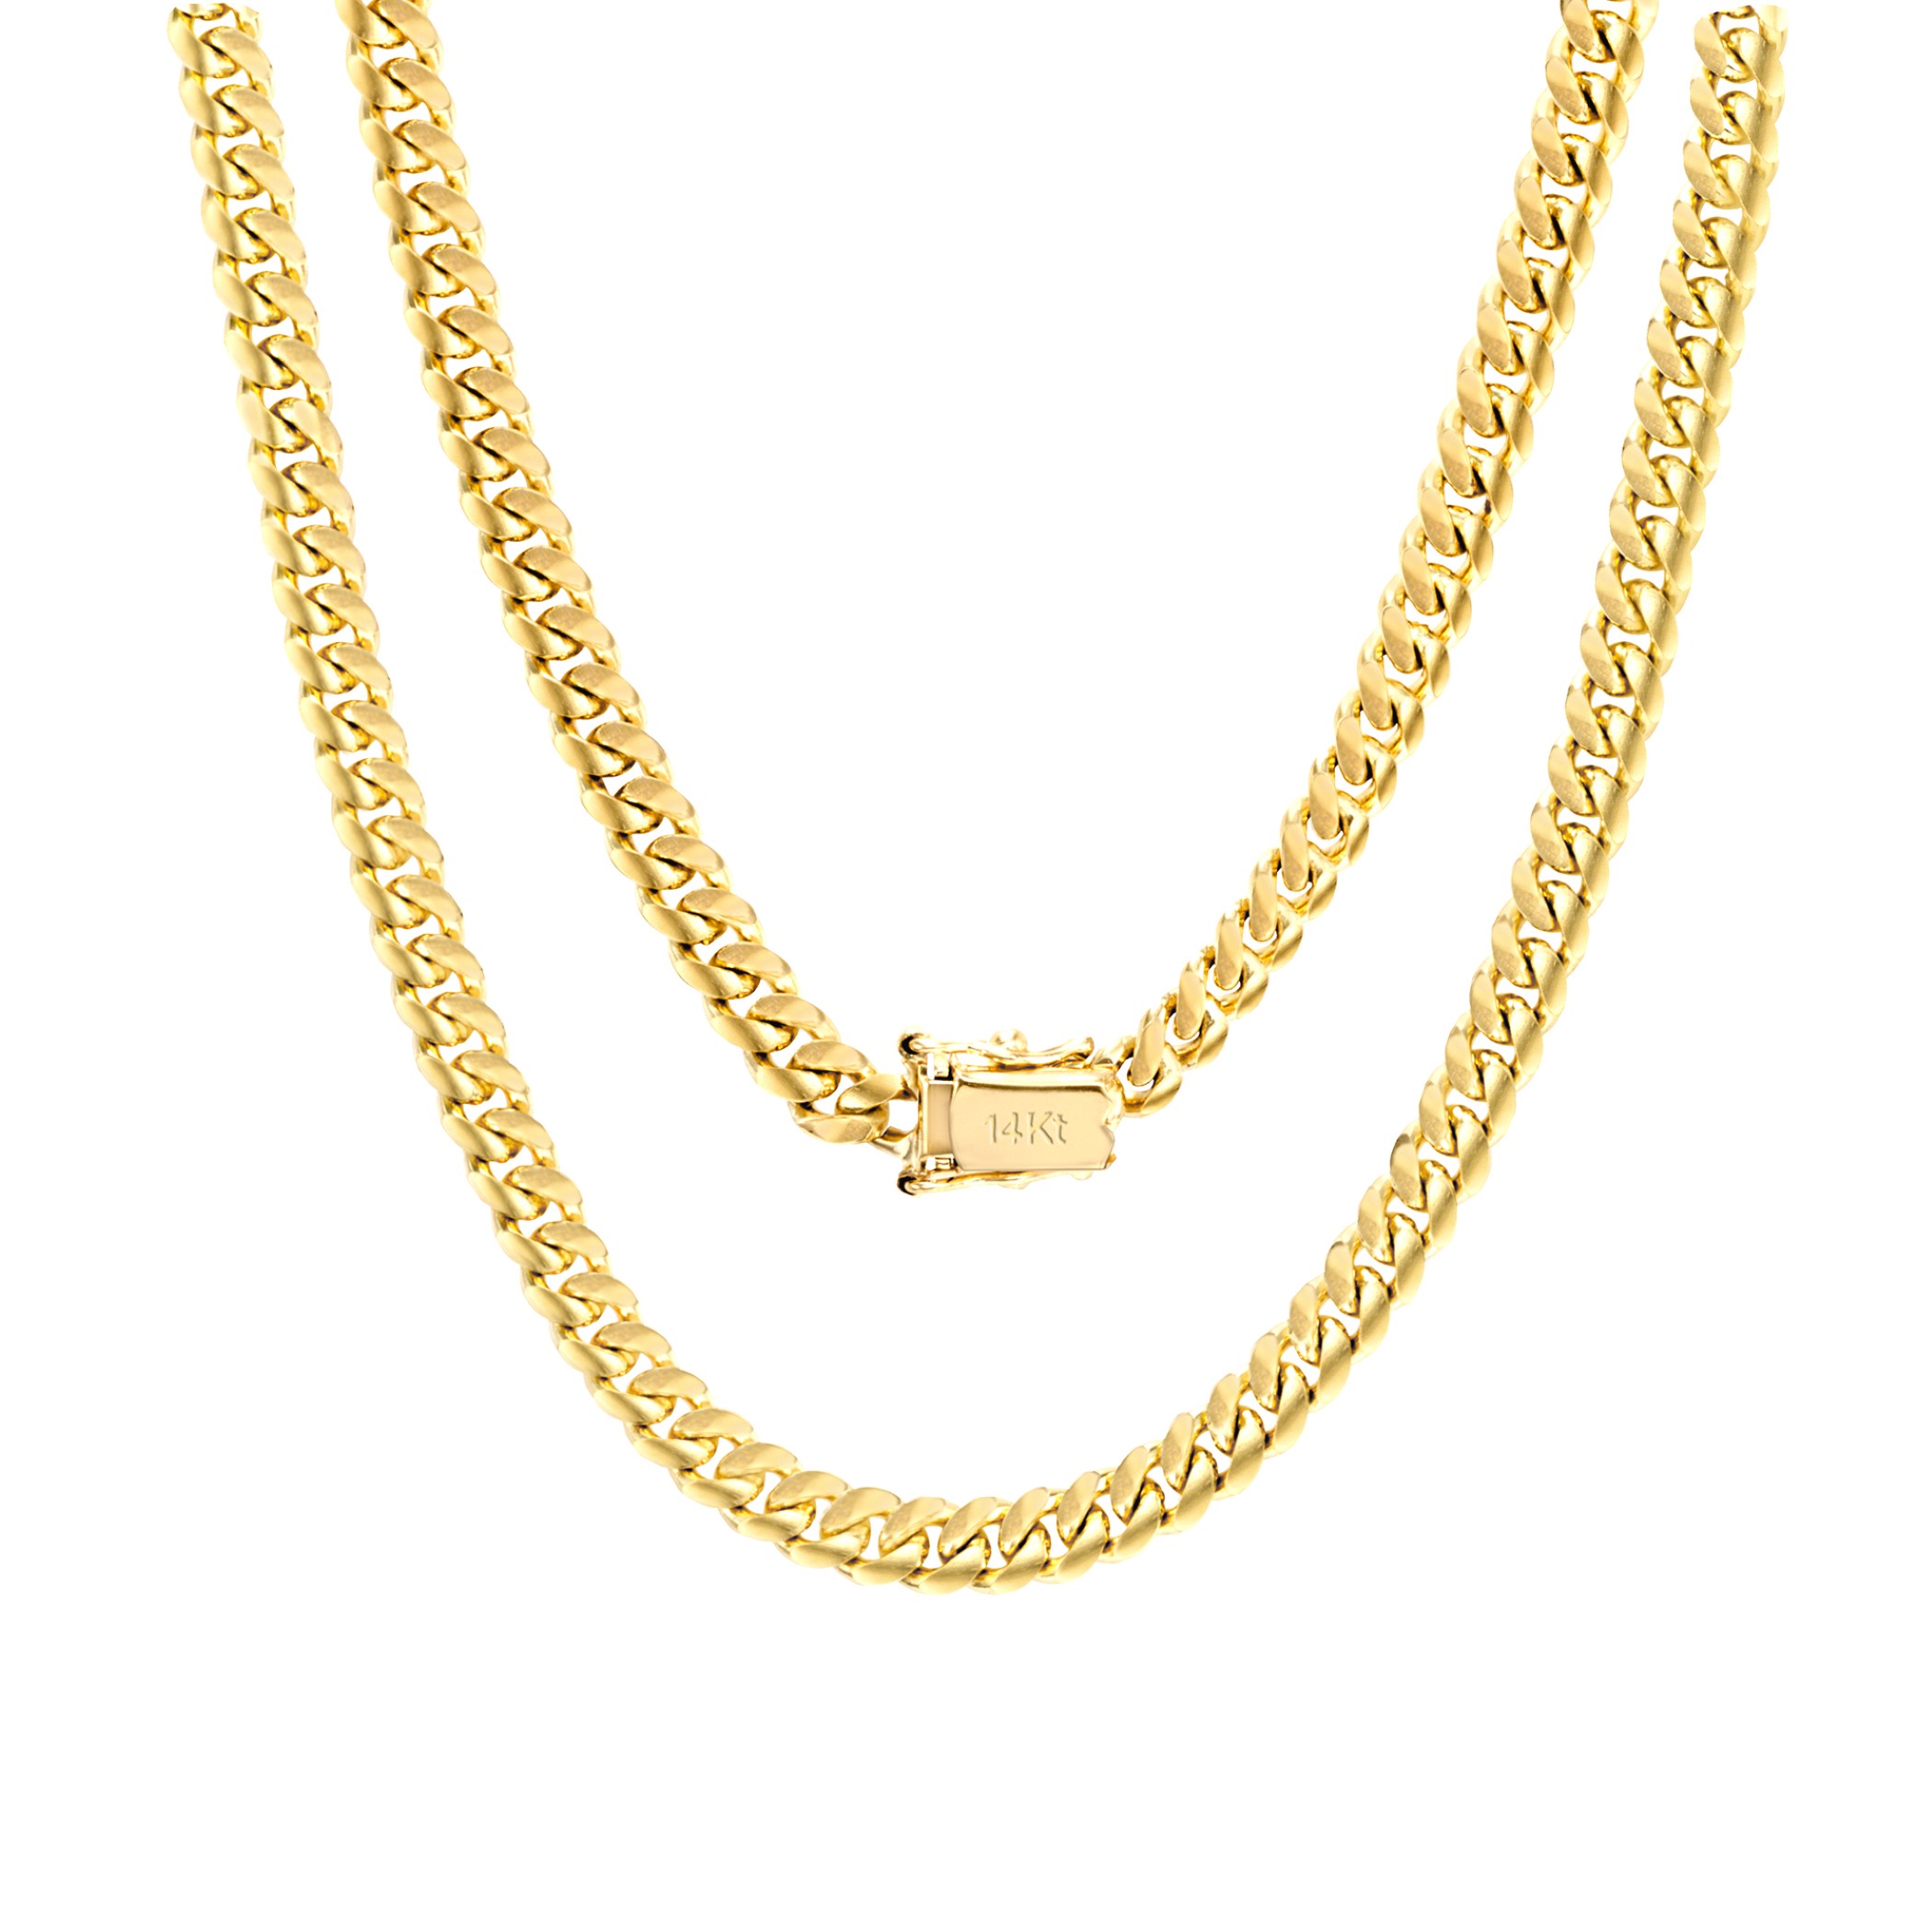 Nuragold 14k Yellow Gold 5mm Solid Miami Cuban Link Chain Pendant Necklace, Mens Jewelry Box Clasp 16" - 30" - image 1 of 11